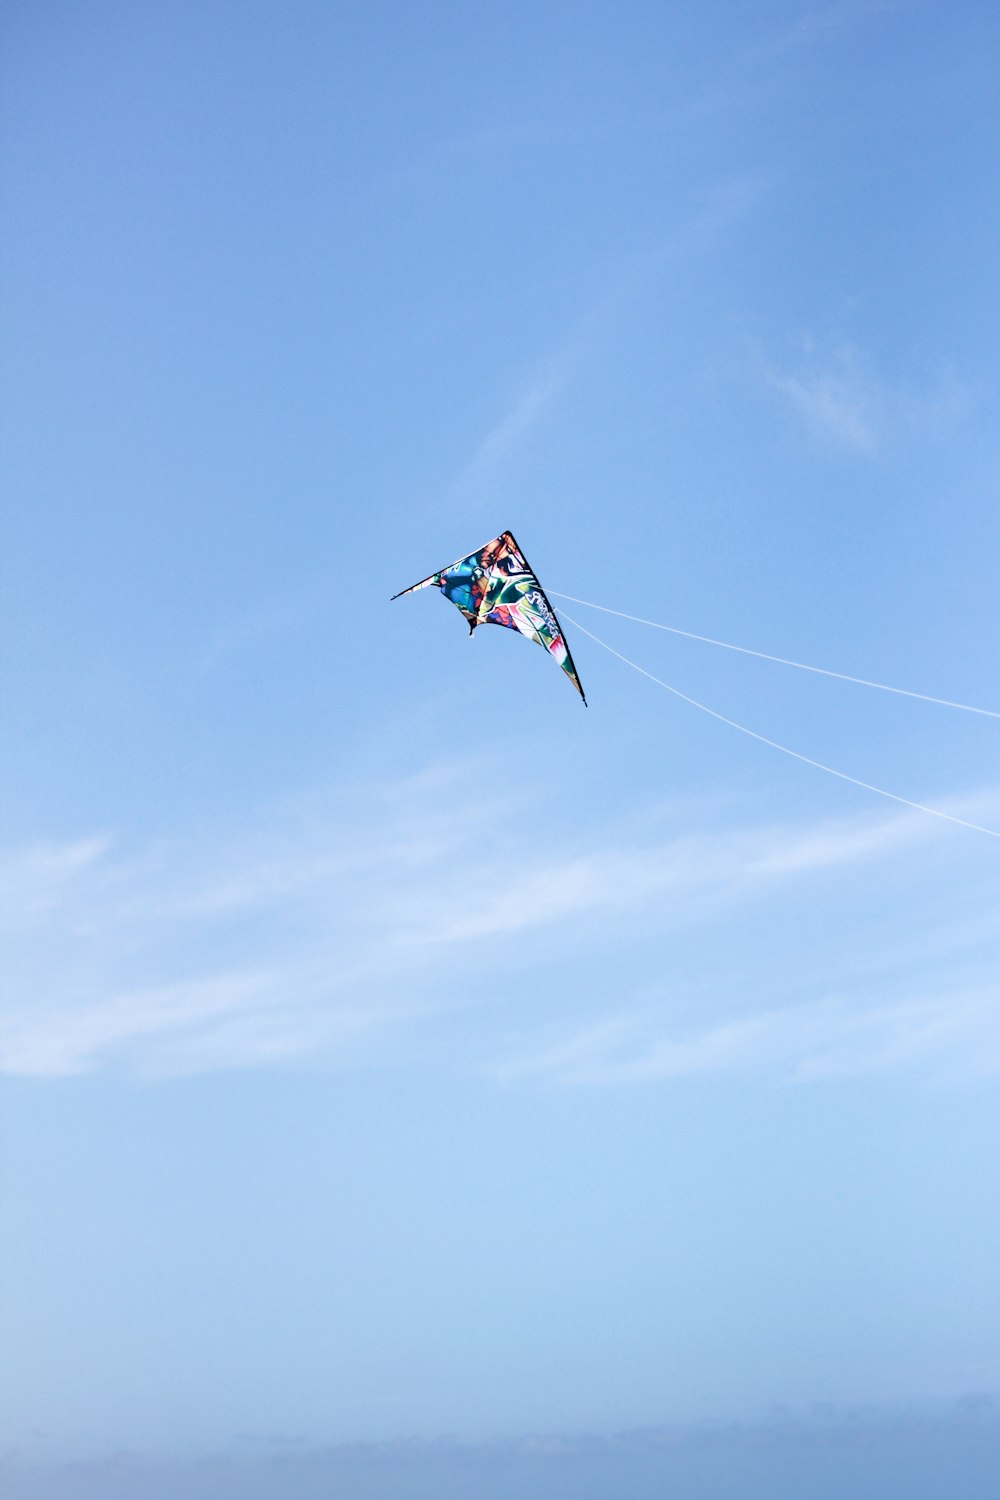 a person flying a kite on the beach